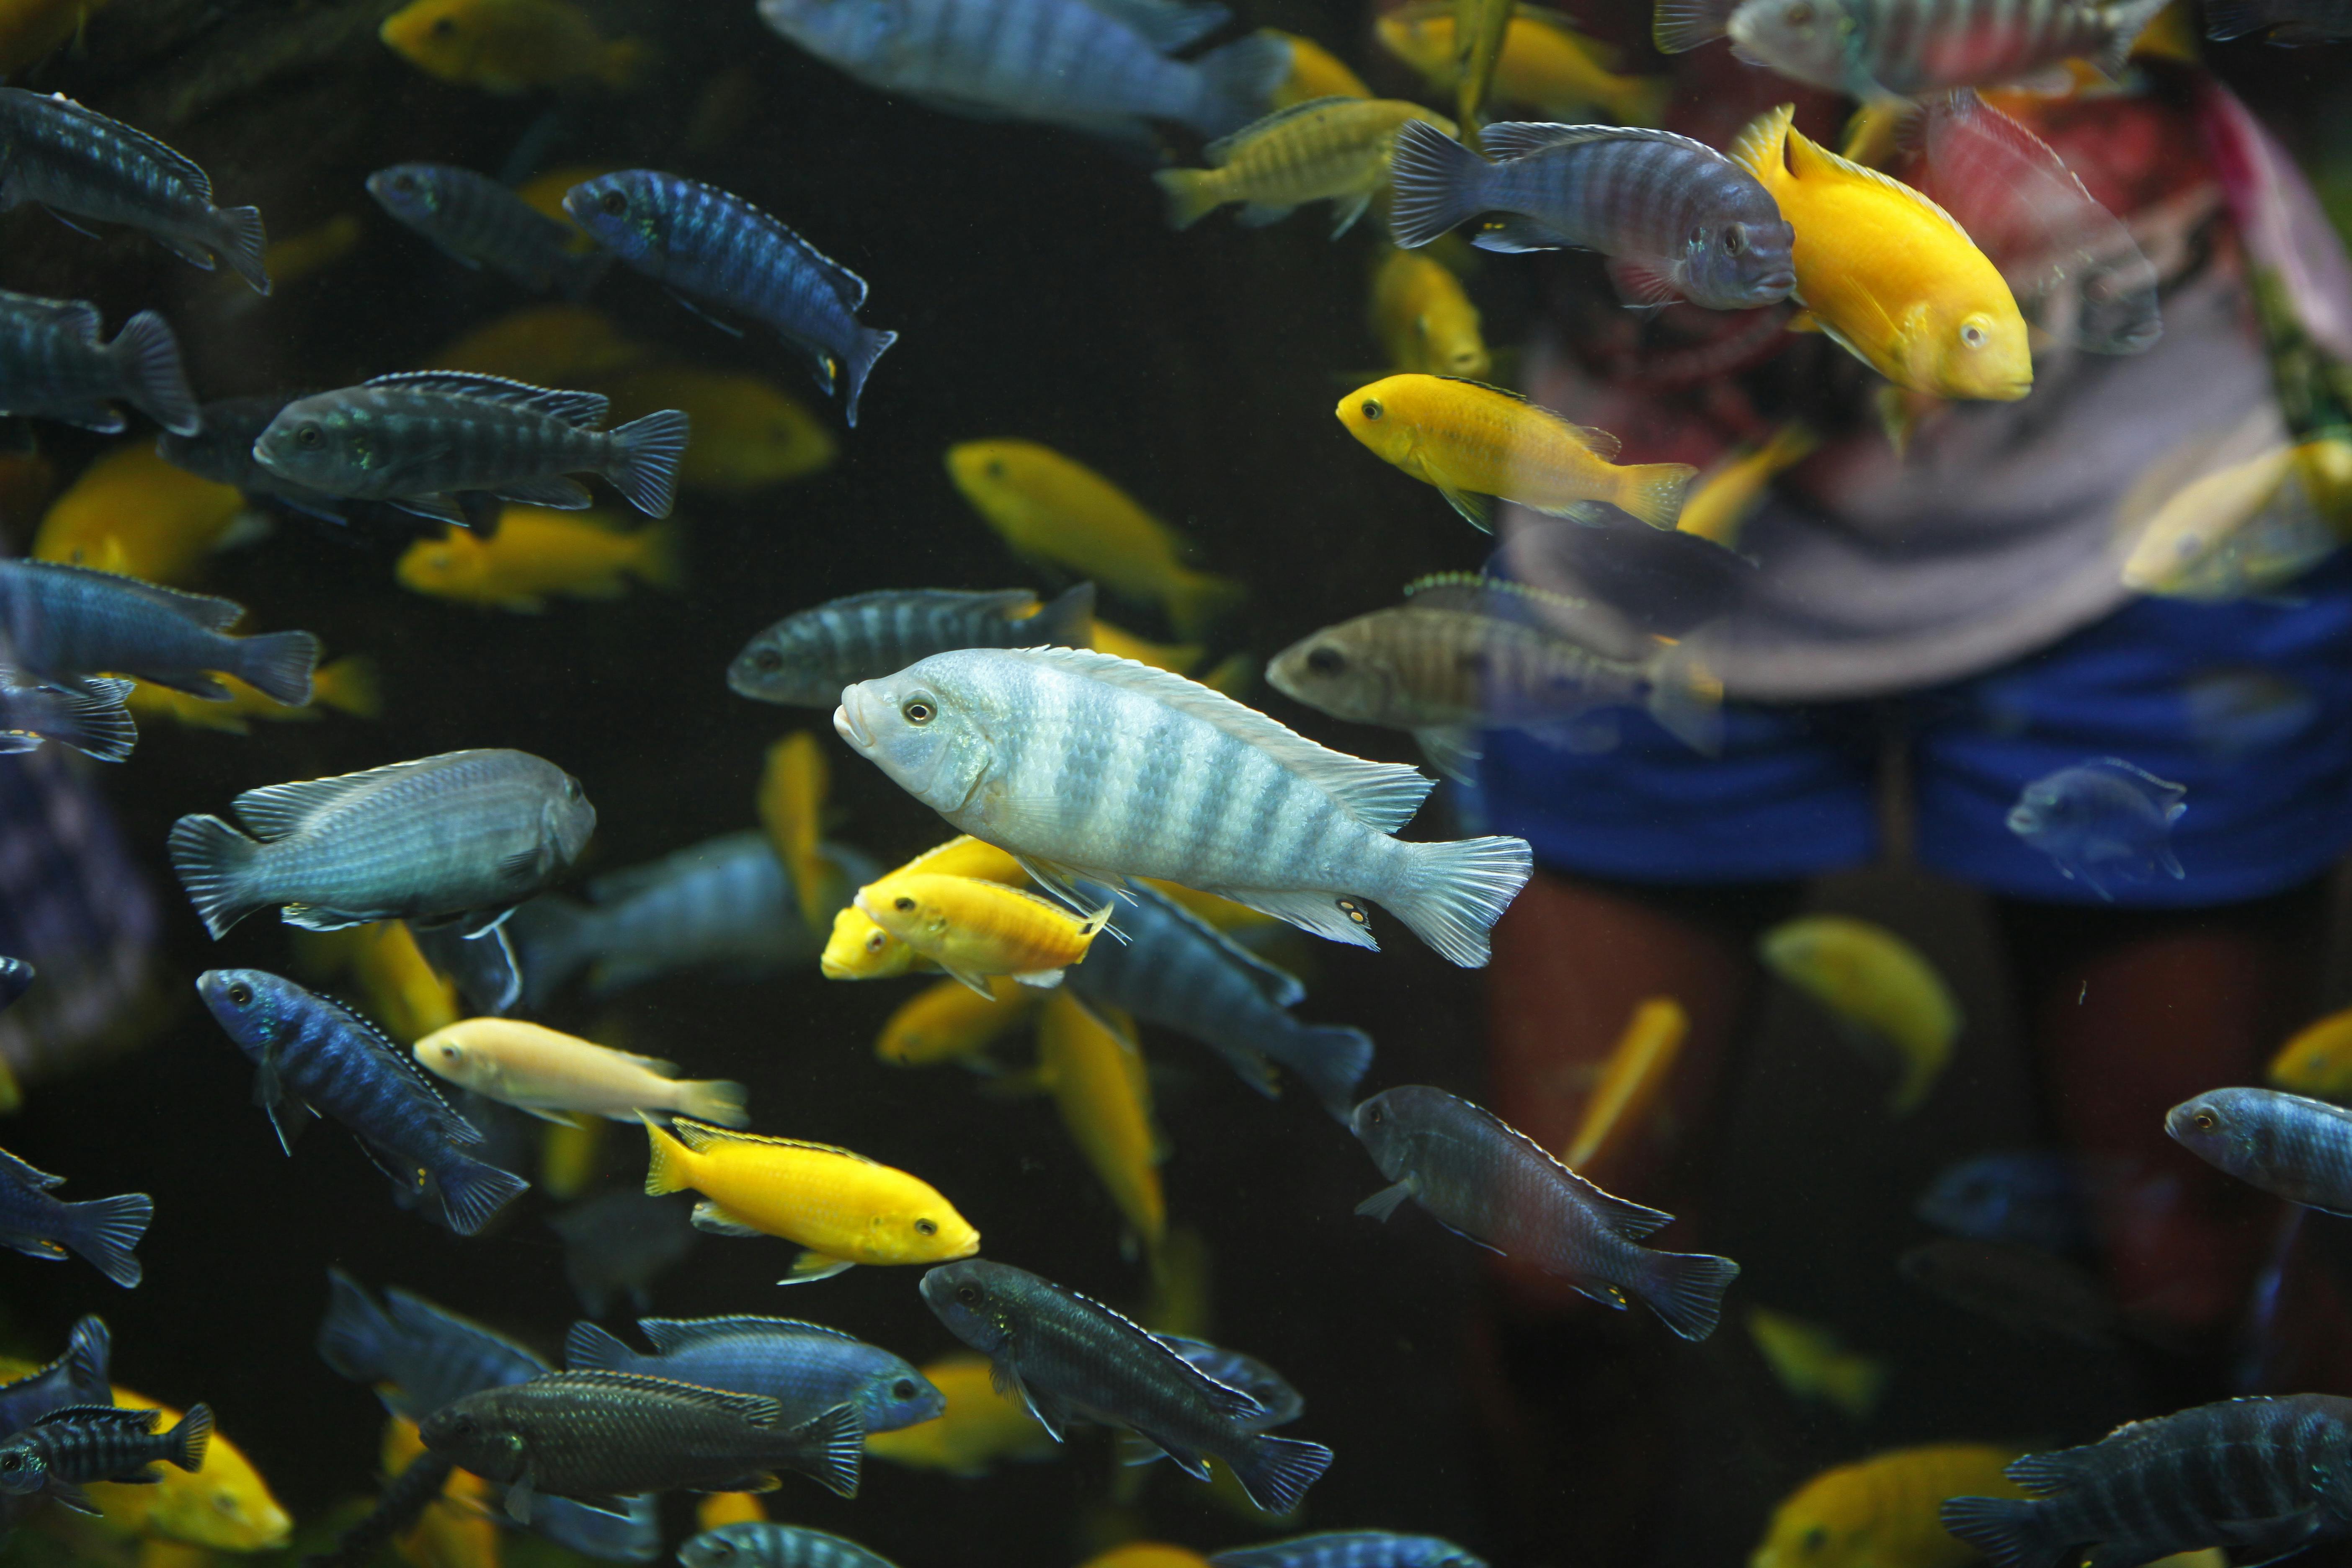 Common Mistakes To Avoid In Tropical Fishkeeping